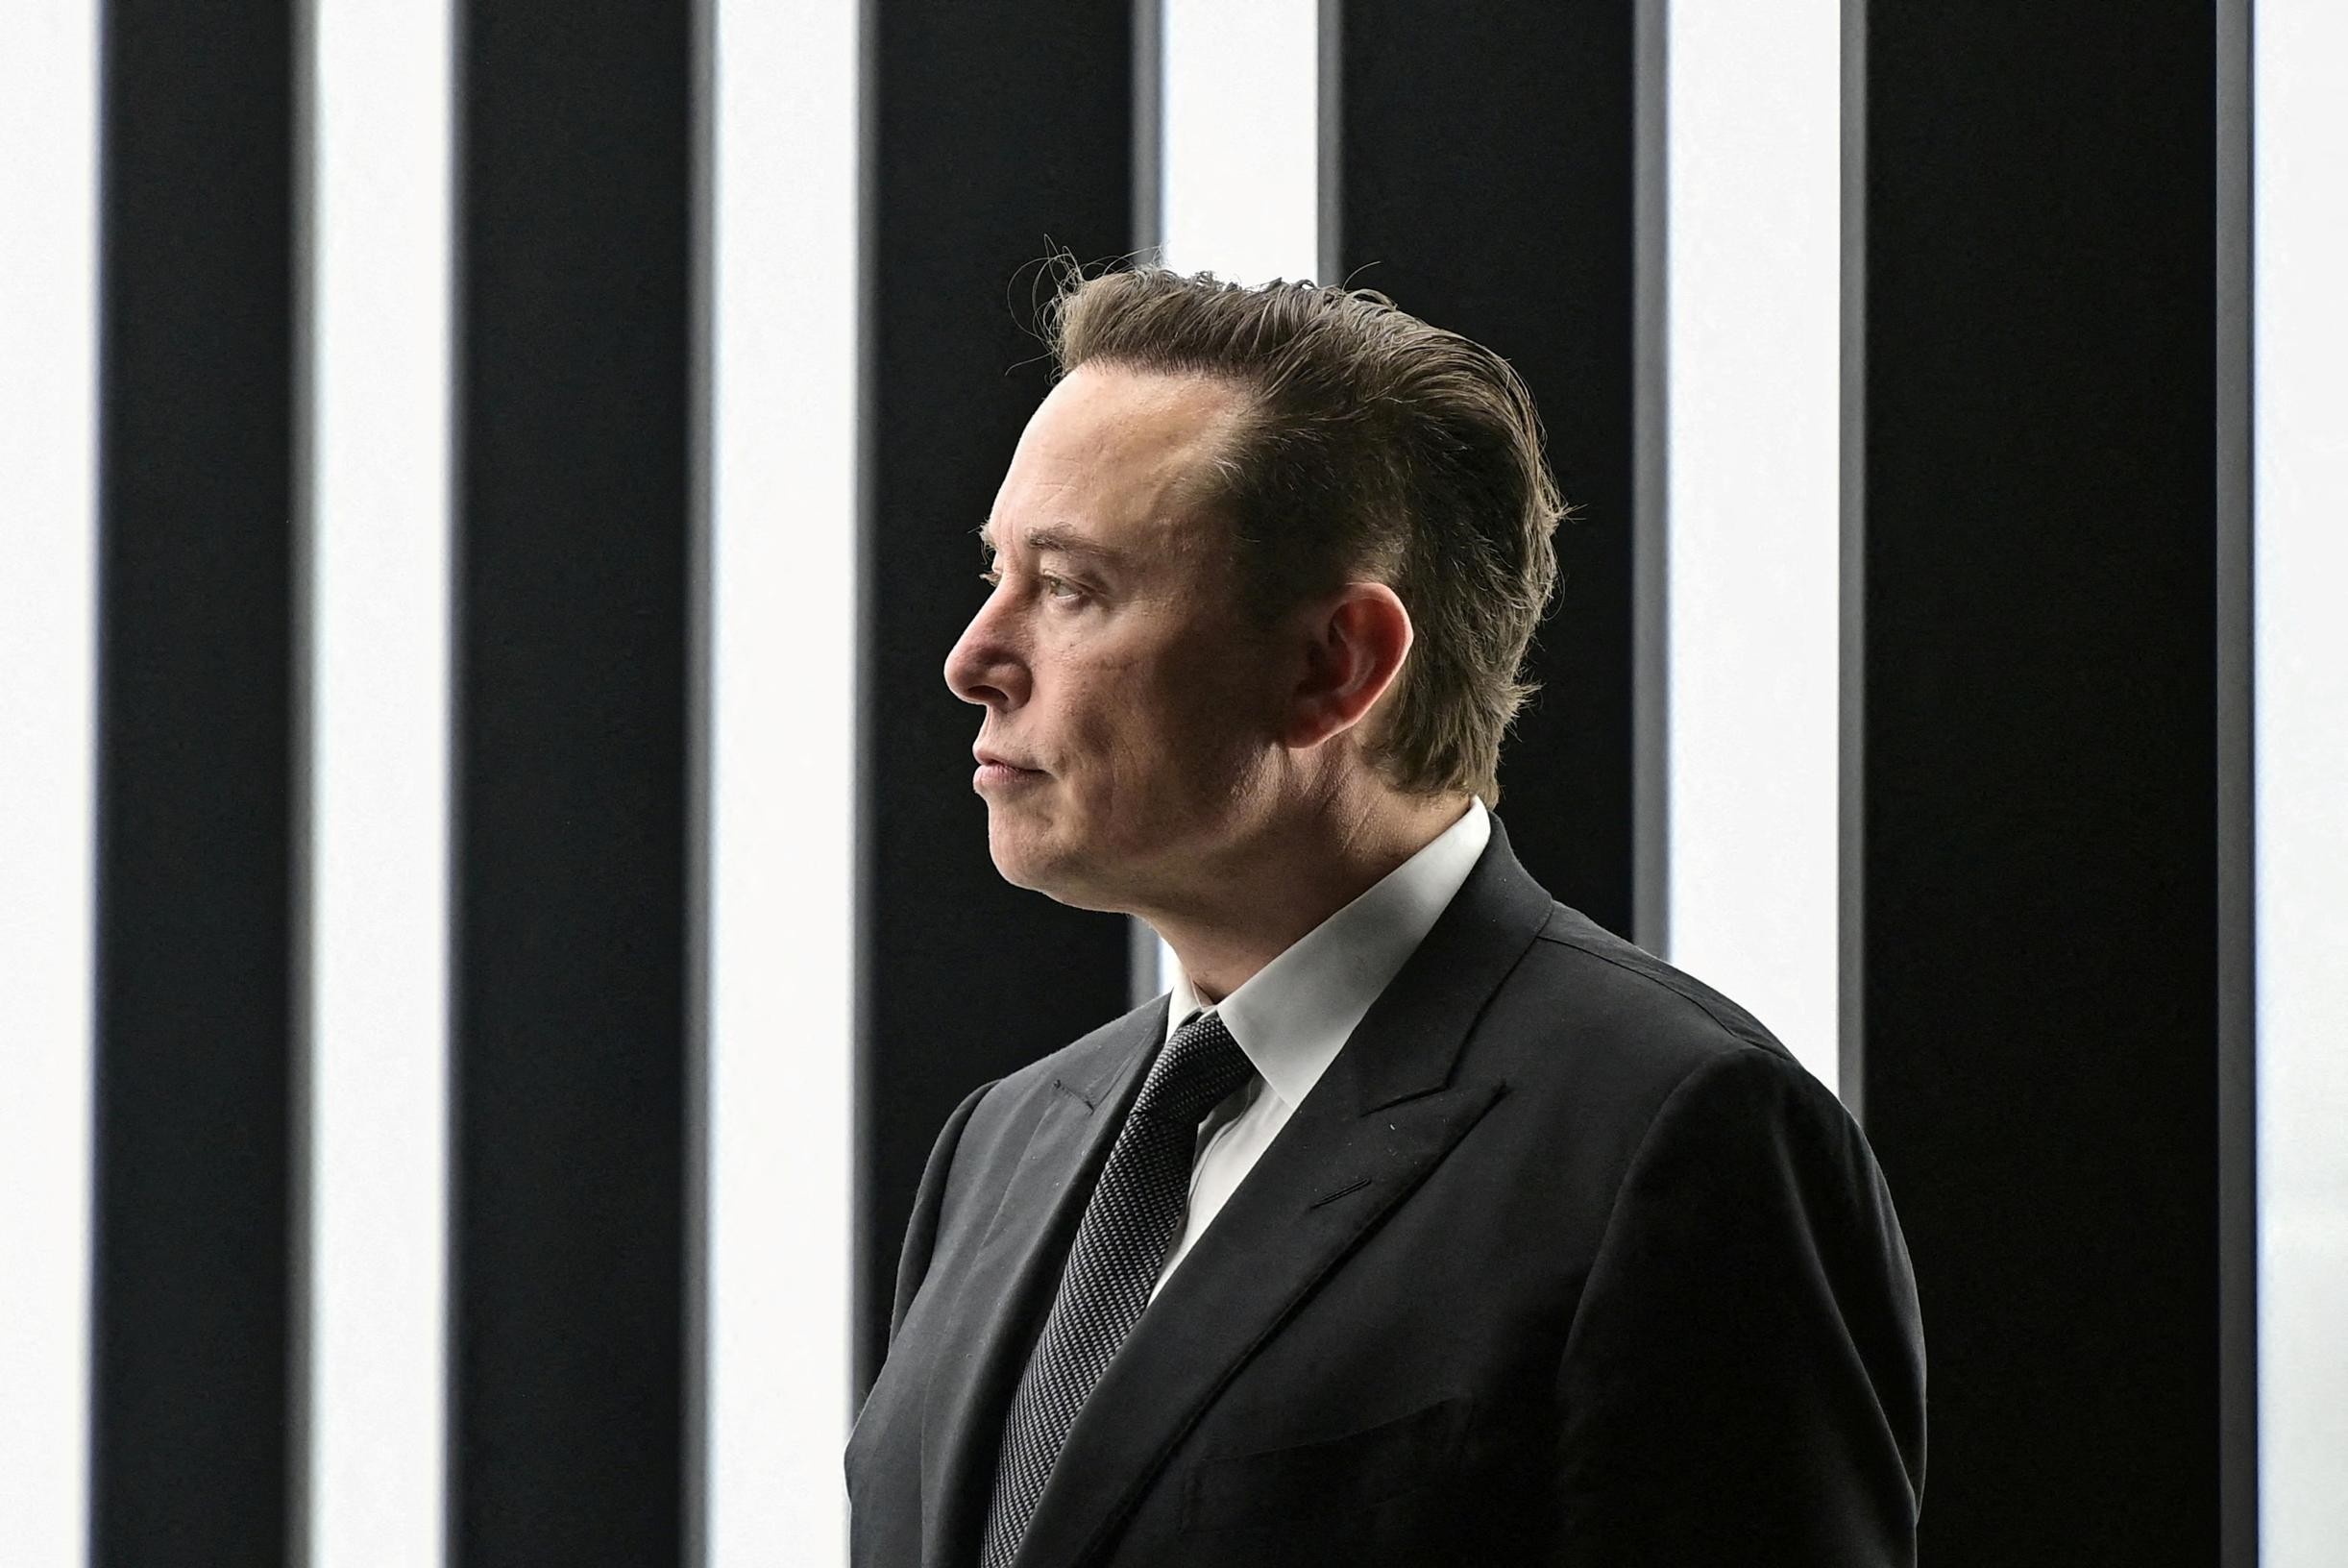 Elon Musk wants to completely take over Twitter: Tesla CEO makes offer of $ 43 billion